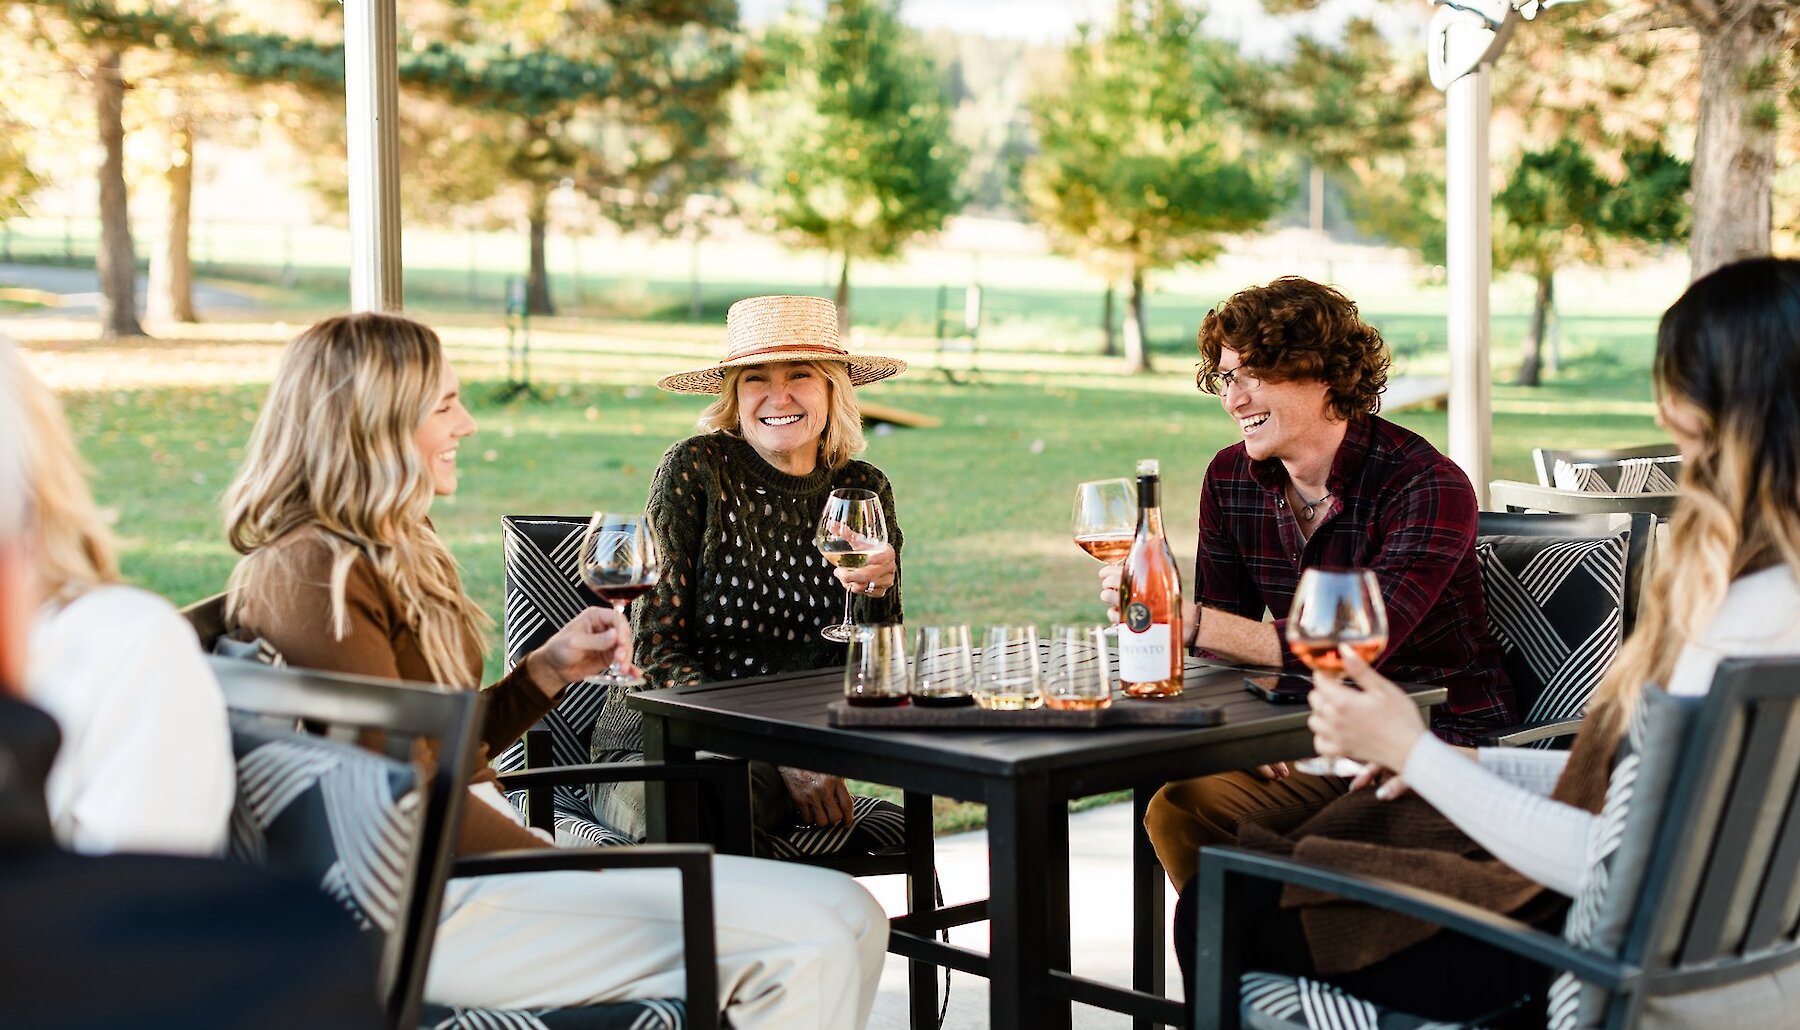 A group sipping on local wines and cider on the sunny patio at Privato Vineyard & Winery and Woodward Cider Co in Kamloops, British Columbia.